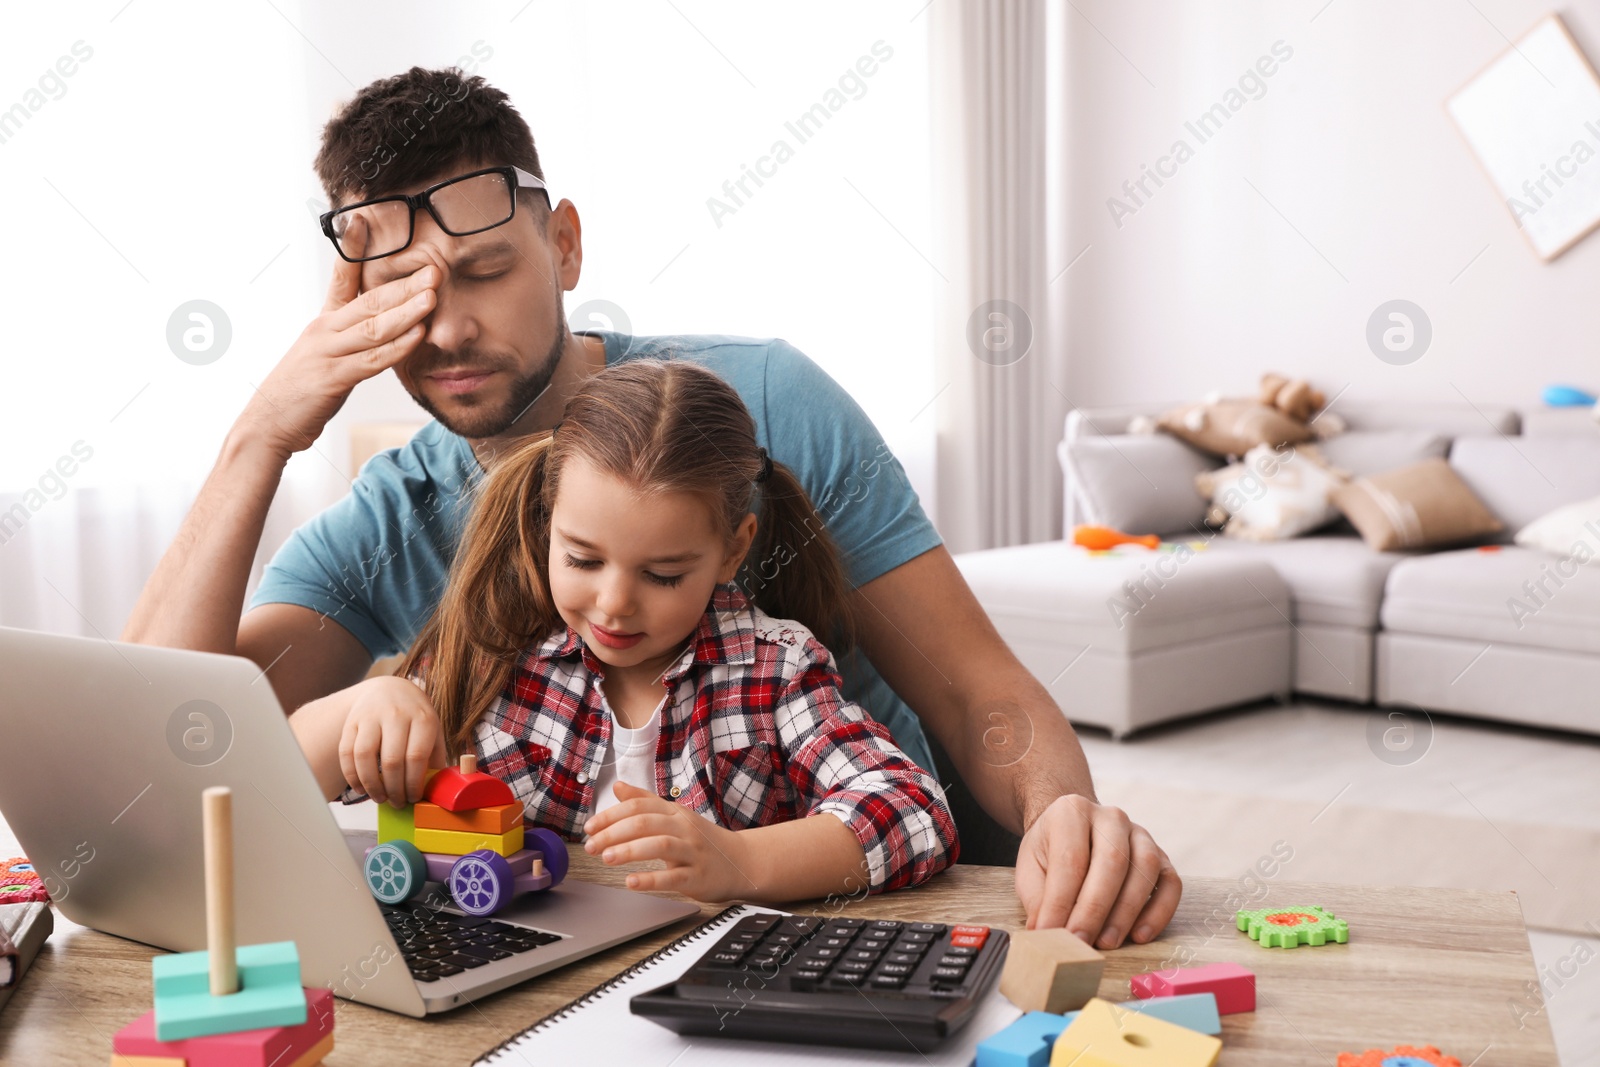 Photo of Cute child disturbing stressed man in living room. Working from home during quarantine